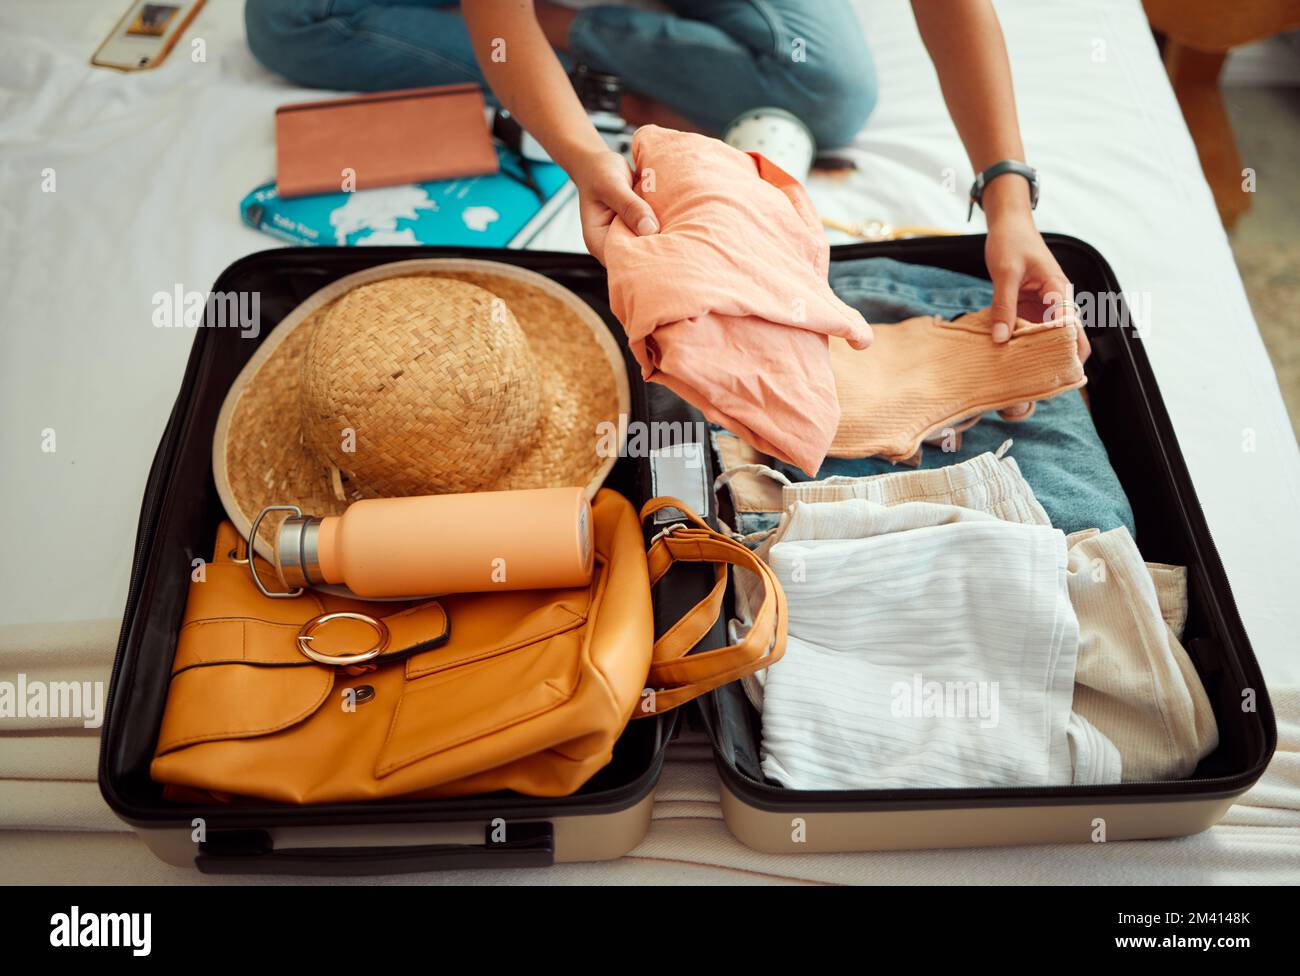 https://c8.alamy.com/comp/2M4148K/hands-woman-and-suitcase-on-a-bed-for-travel-adventure-and-summer-vacation-packing-and-clothing-hand-girl-and-luggage-in-a-bedroom-for-travelling-2M4148K.jpg